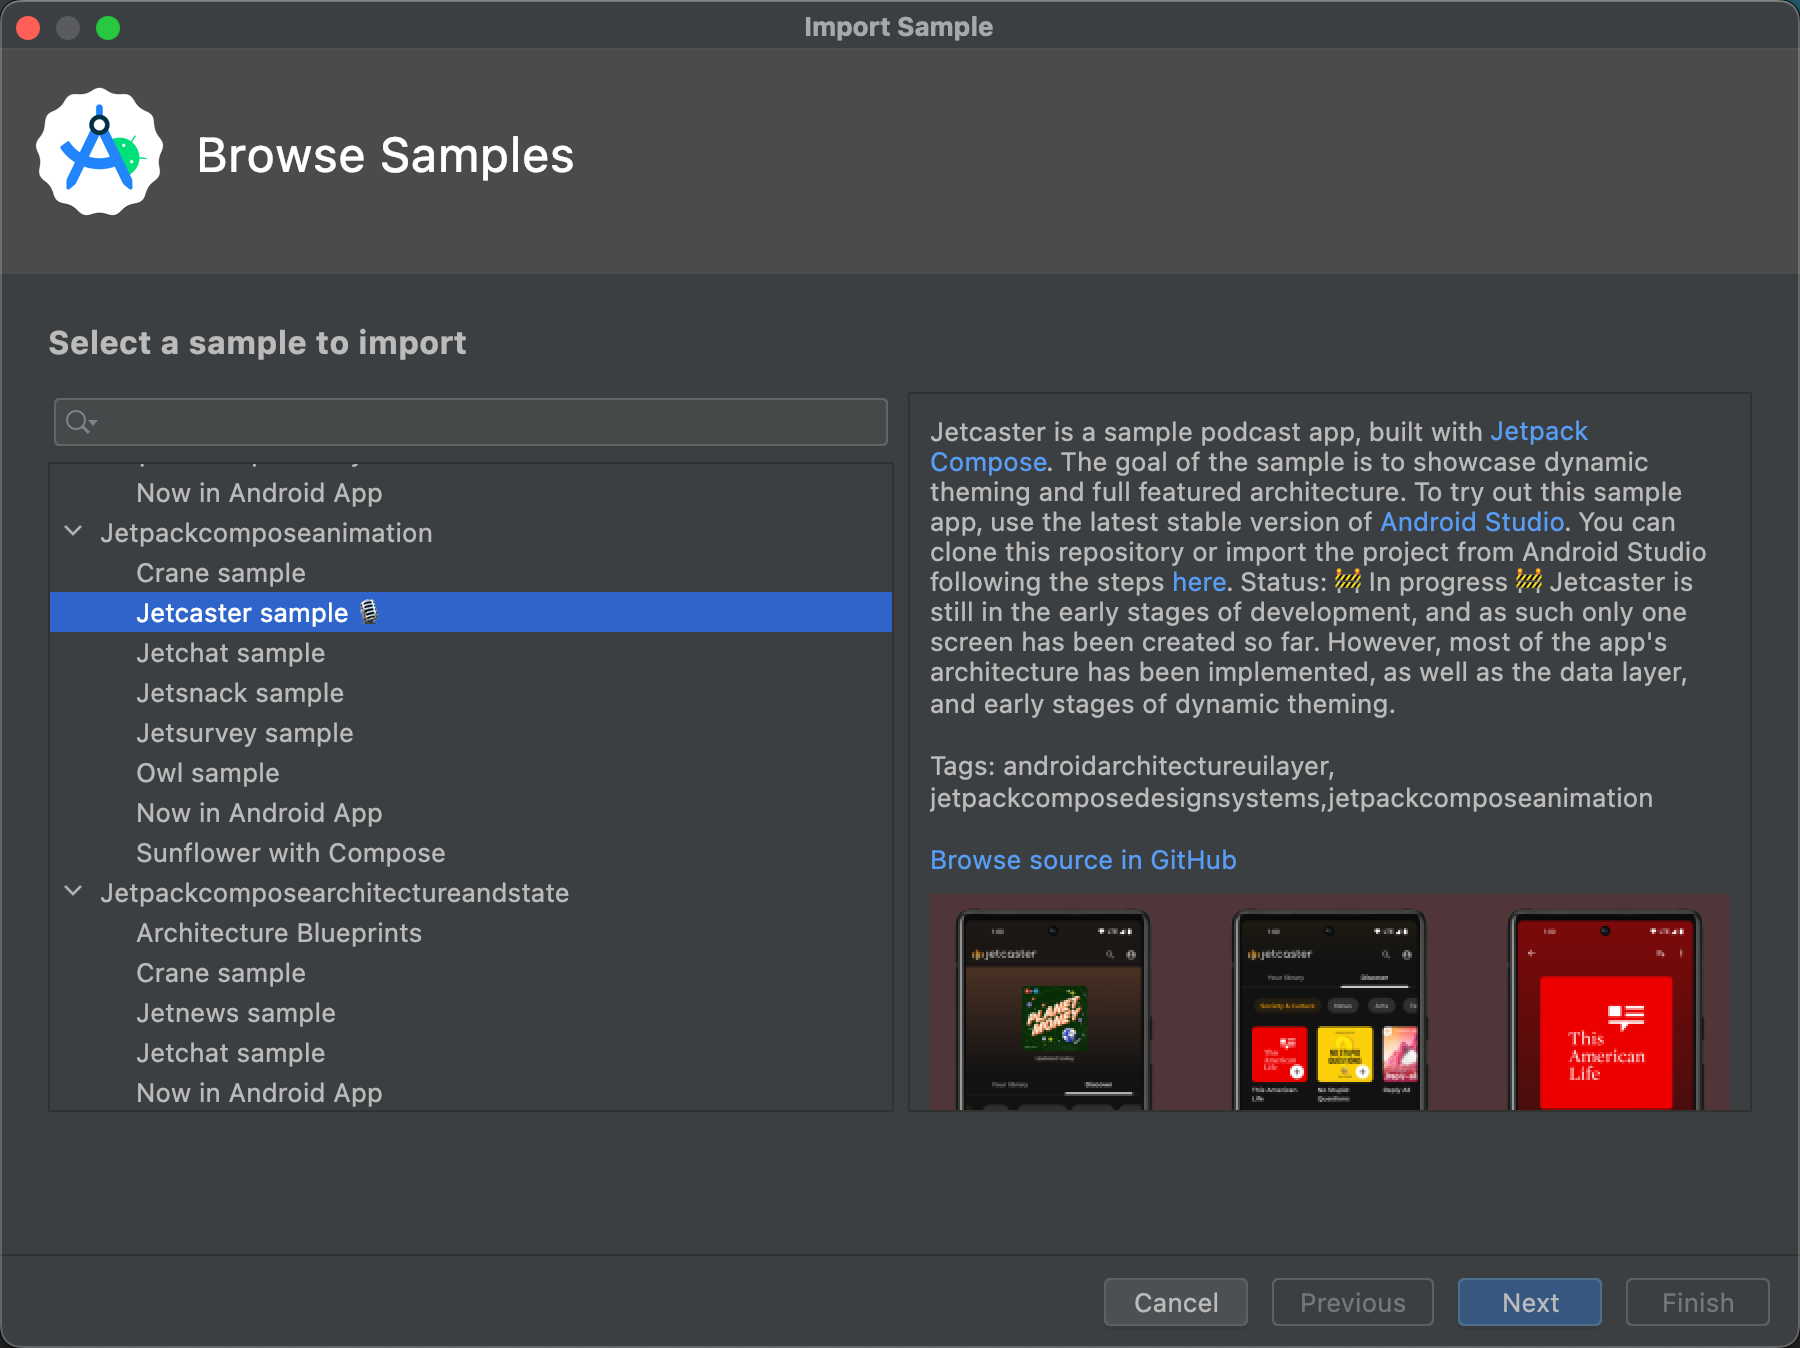 The Browse Samples dialog